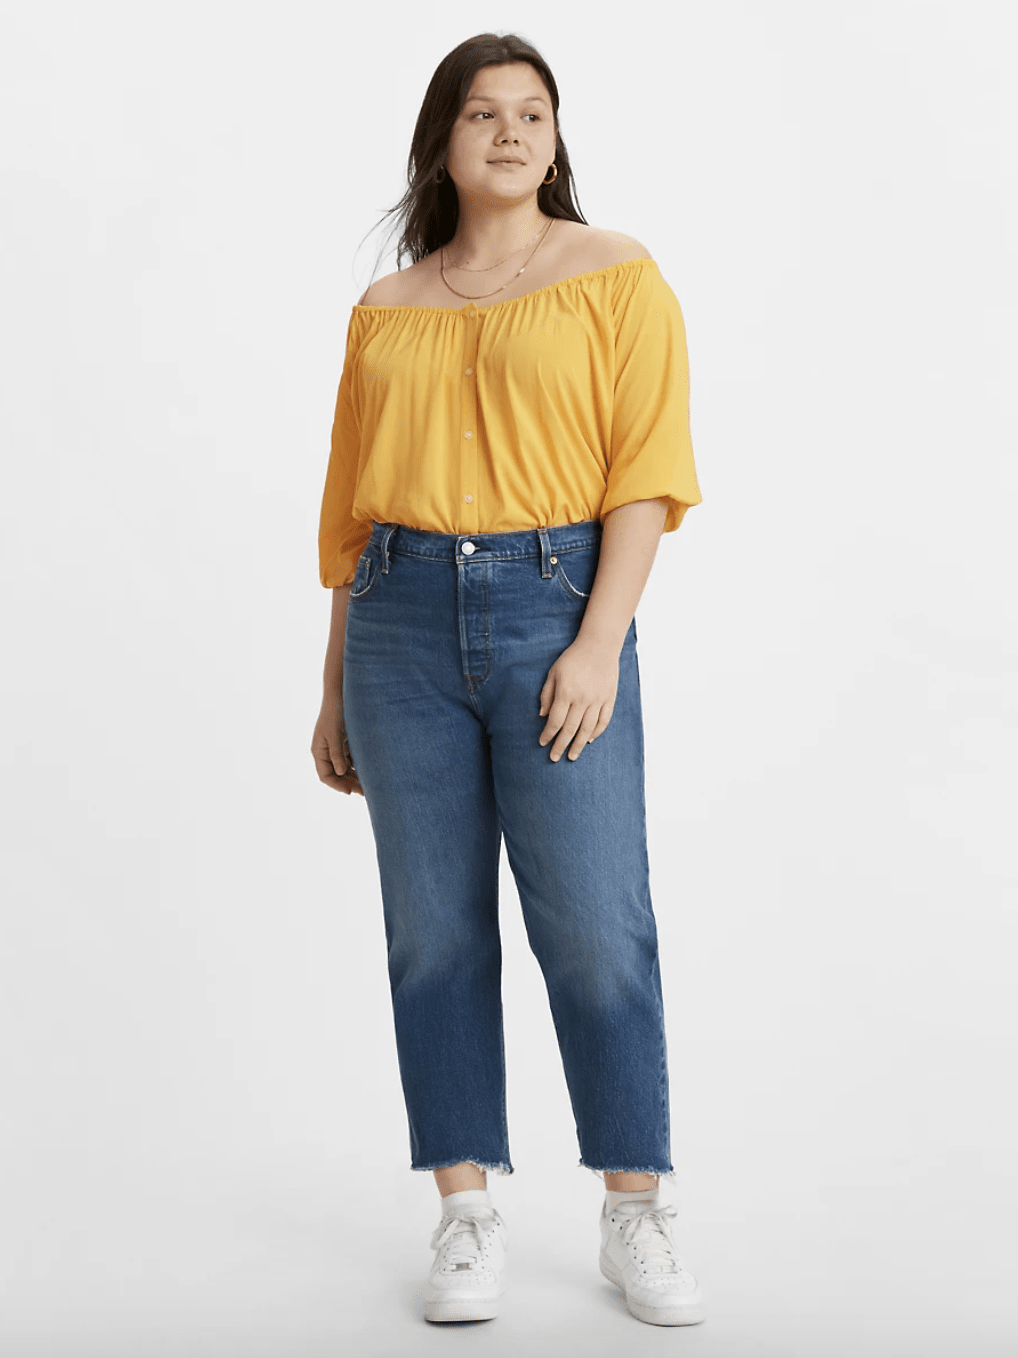 17/21 Exclusive Denim Plus-Sized Clothing On Sale Up To 90% Off Retail